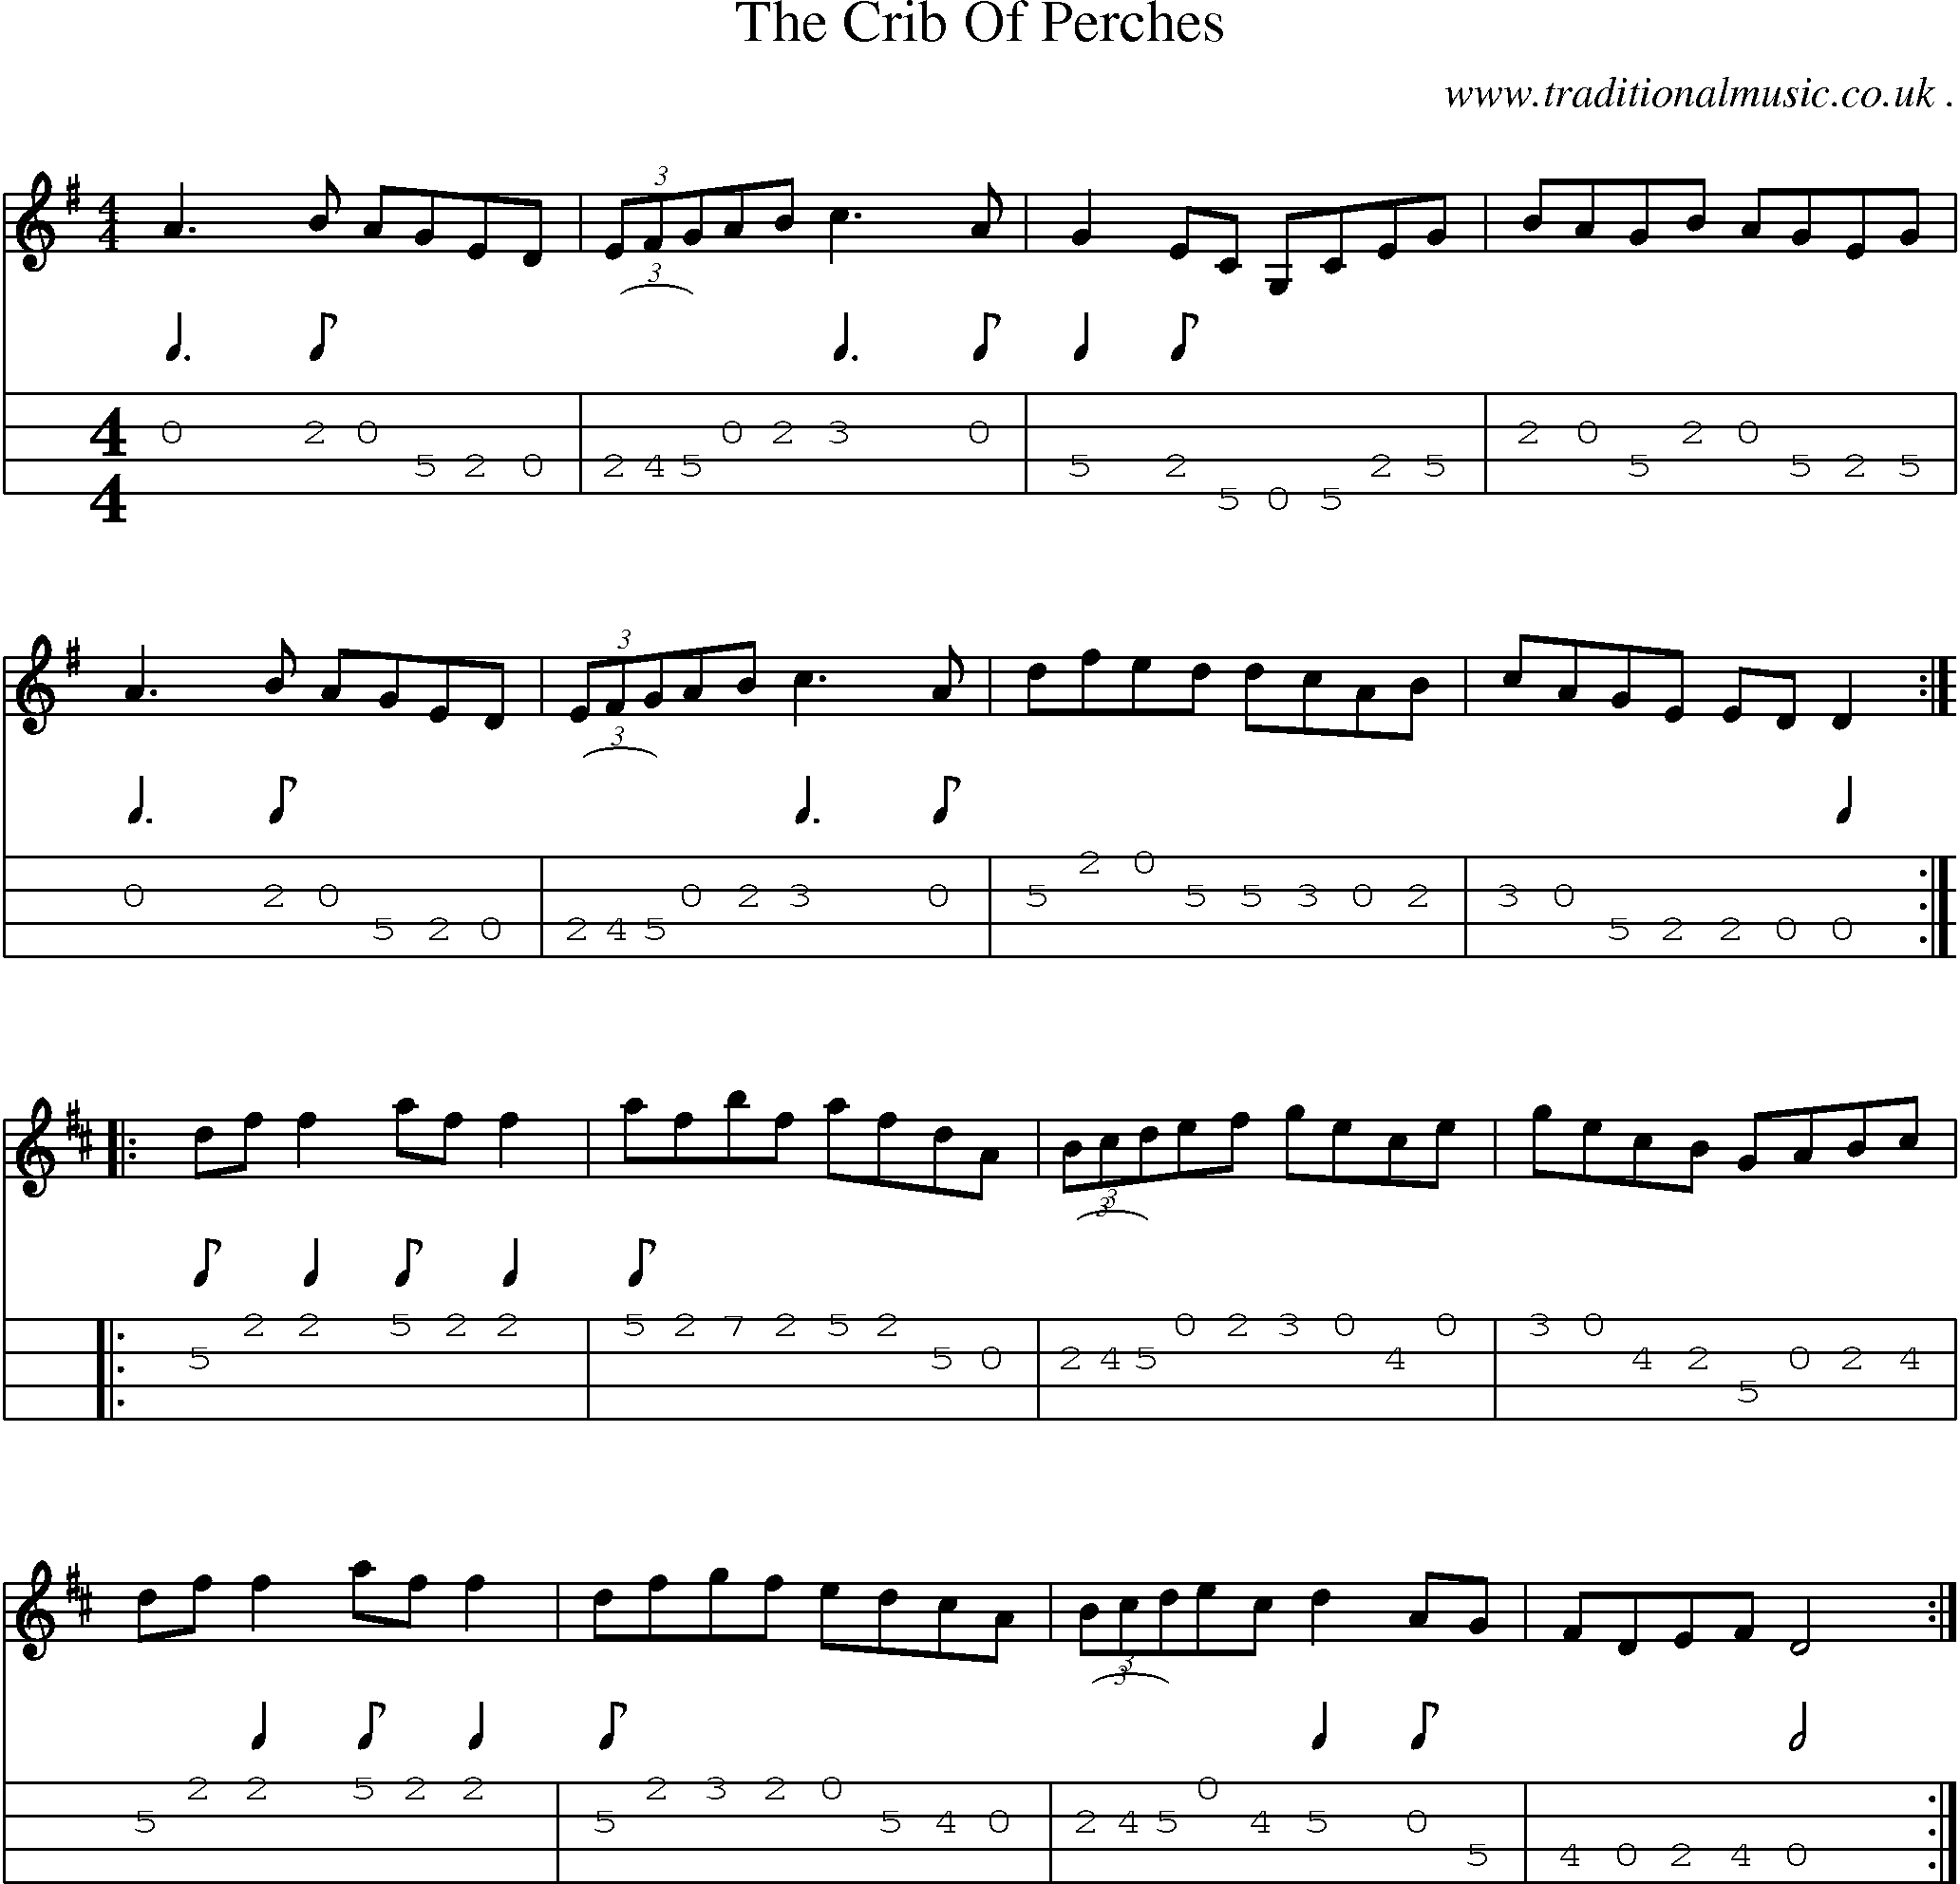 Sheet-Music and Mandolin Tabs for The Crib Of Perches